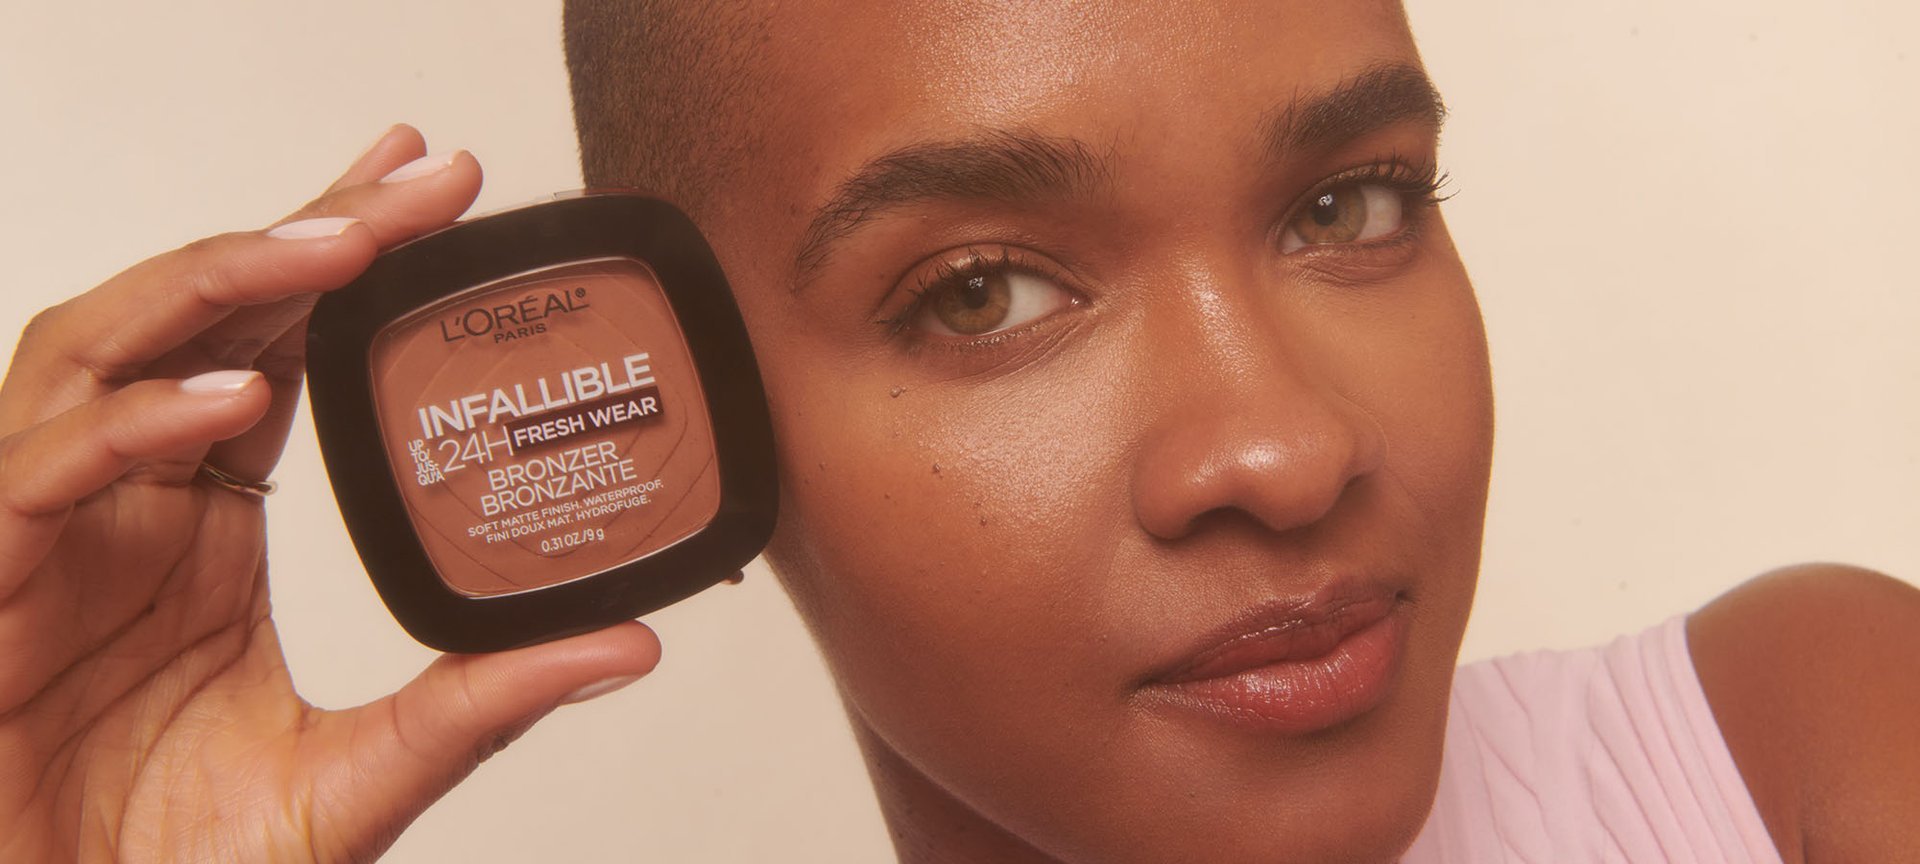 How To Apply Bronzer: Tips From A Makeup Artist